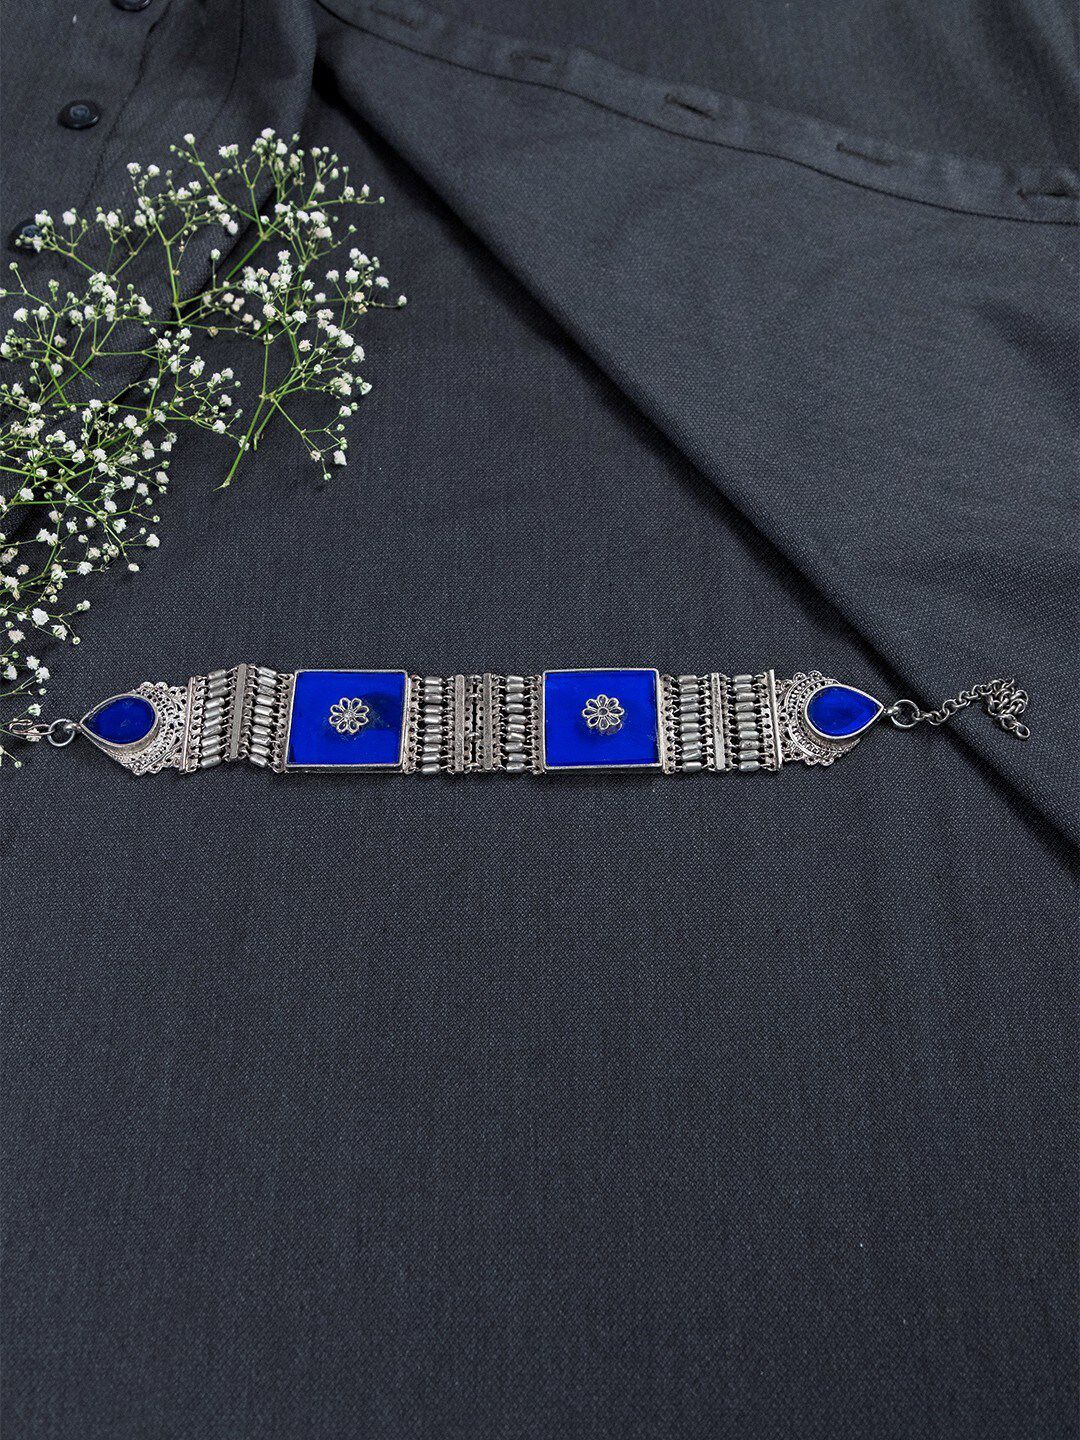 creyons by mansi Silver-Toned Blue Oxidised Choker Necklace Price in India